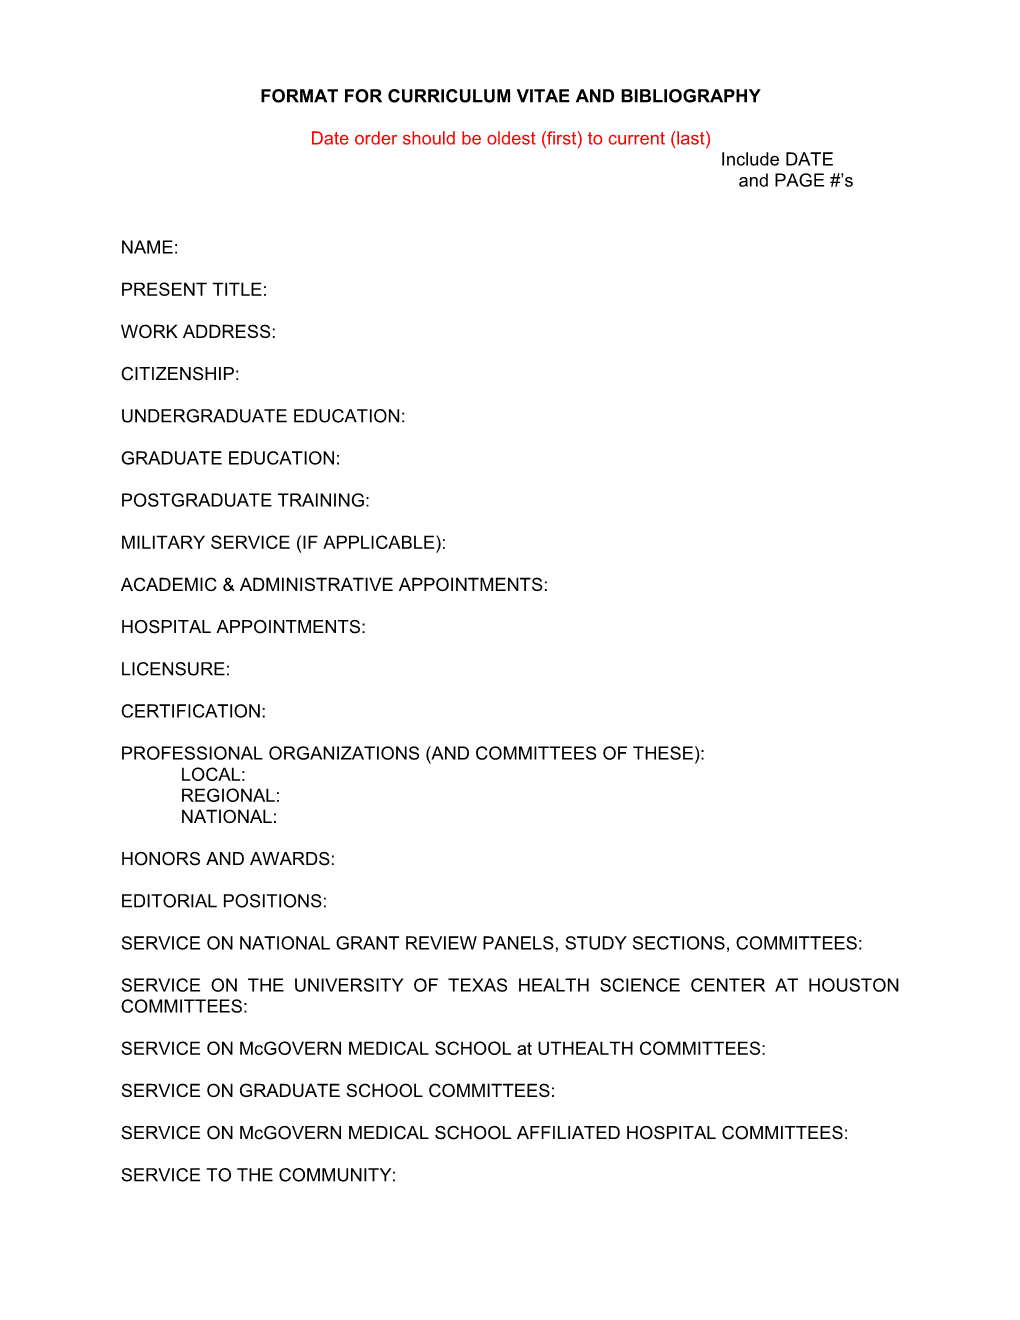 Format for Curriculum Vitae and Bibliography